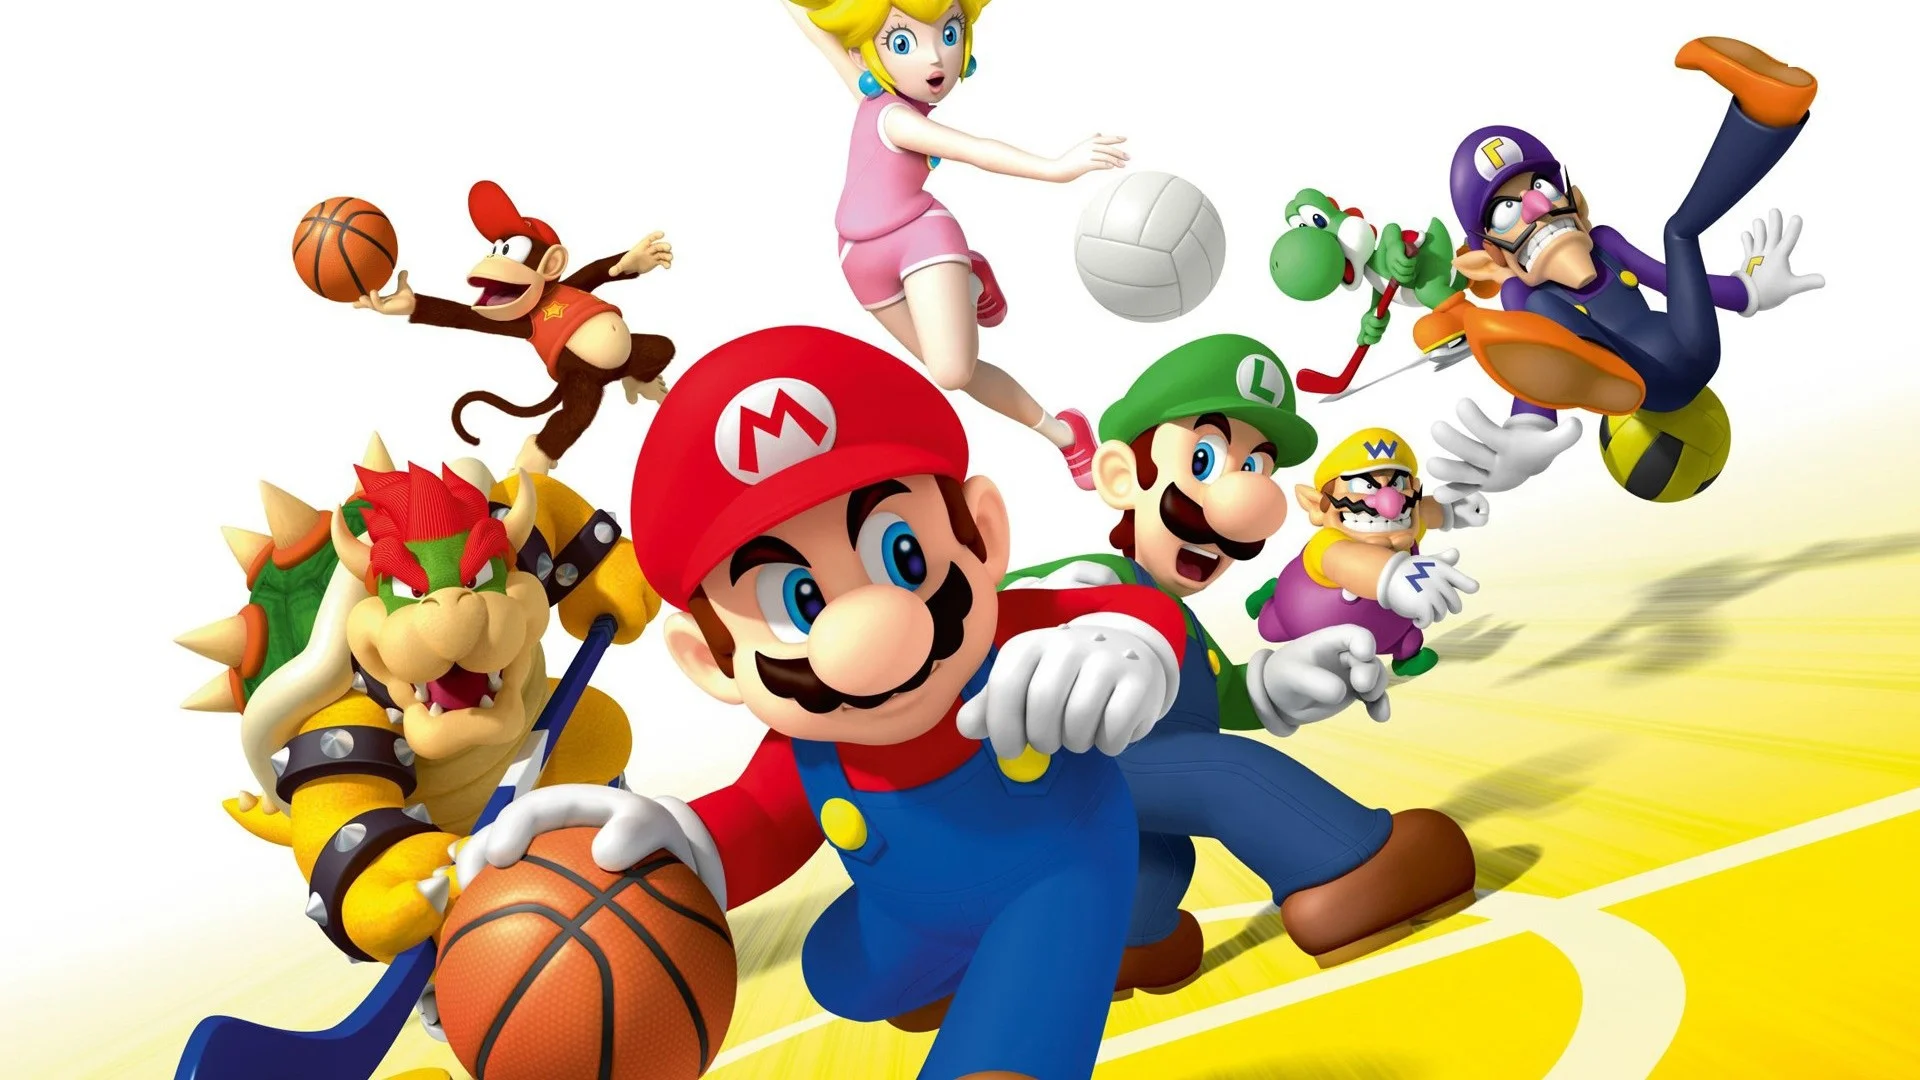 … mario sports mix wallhd download hd background wallpapers free …